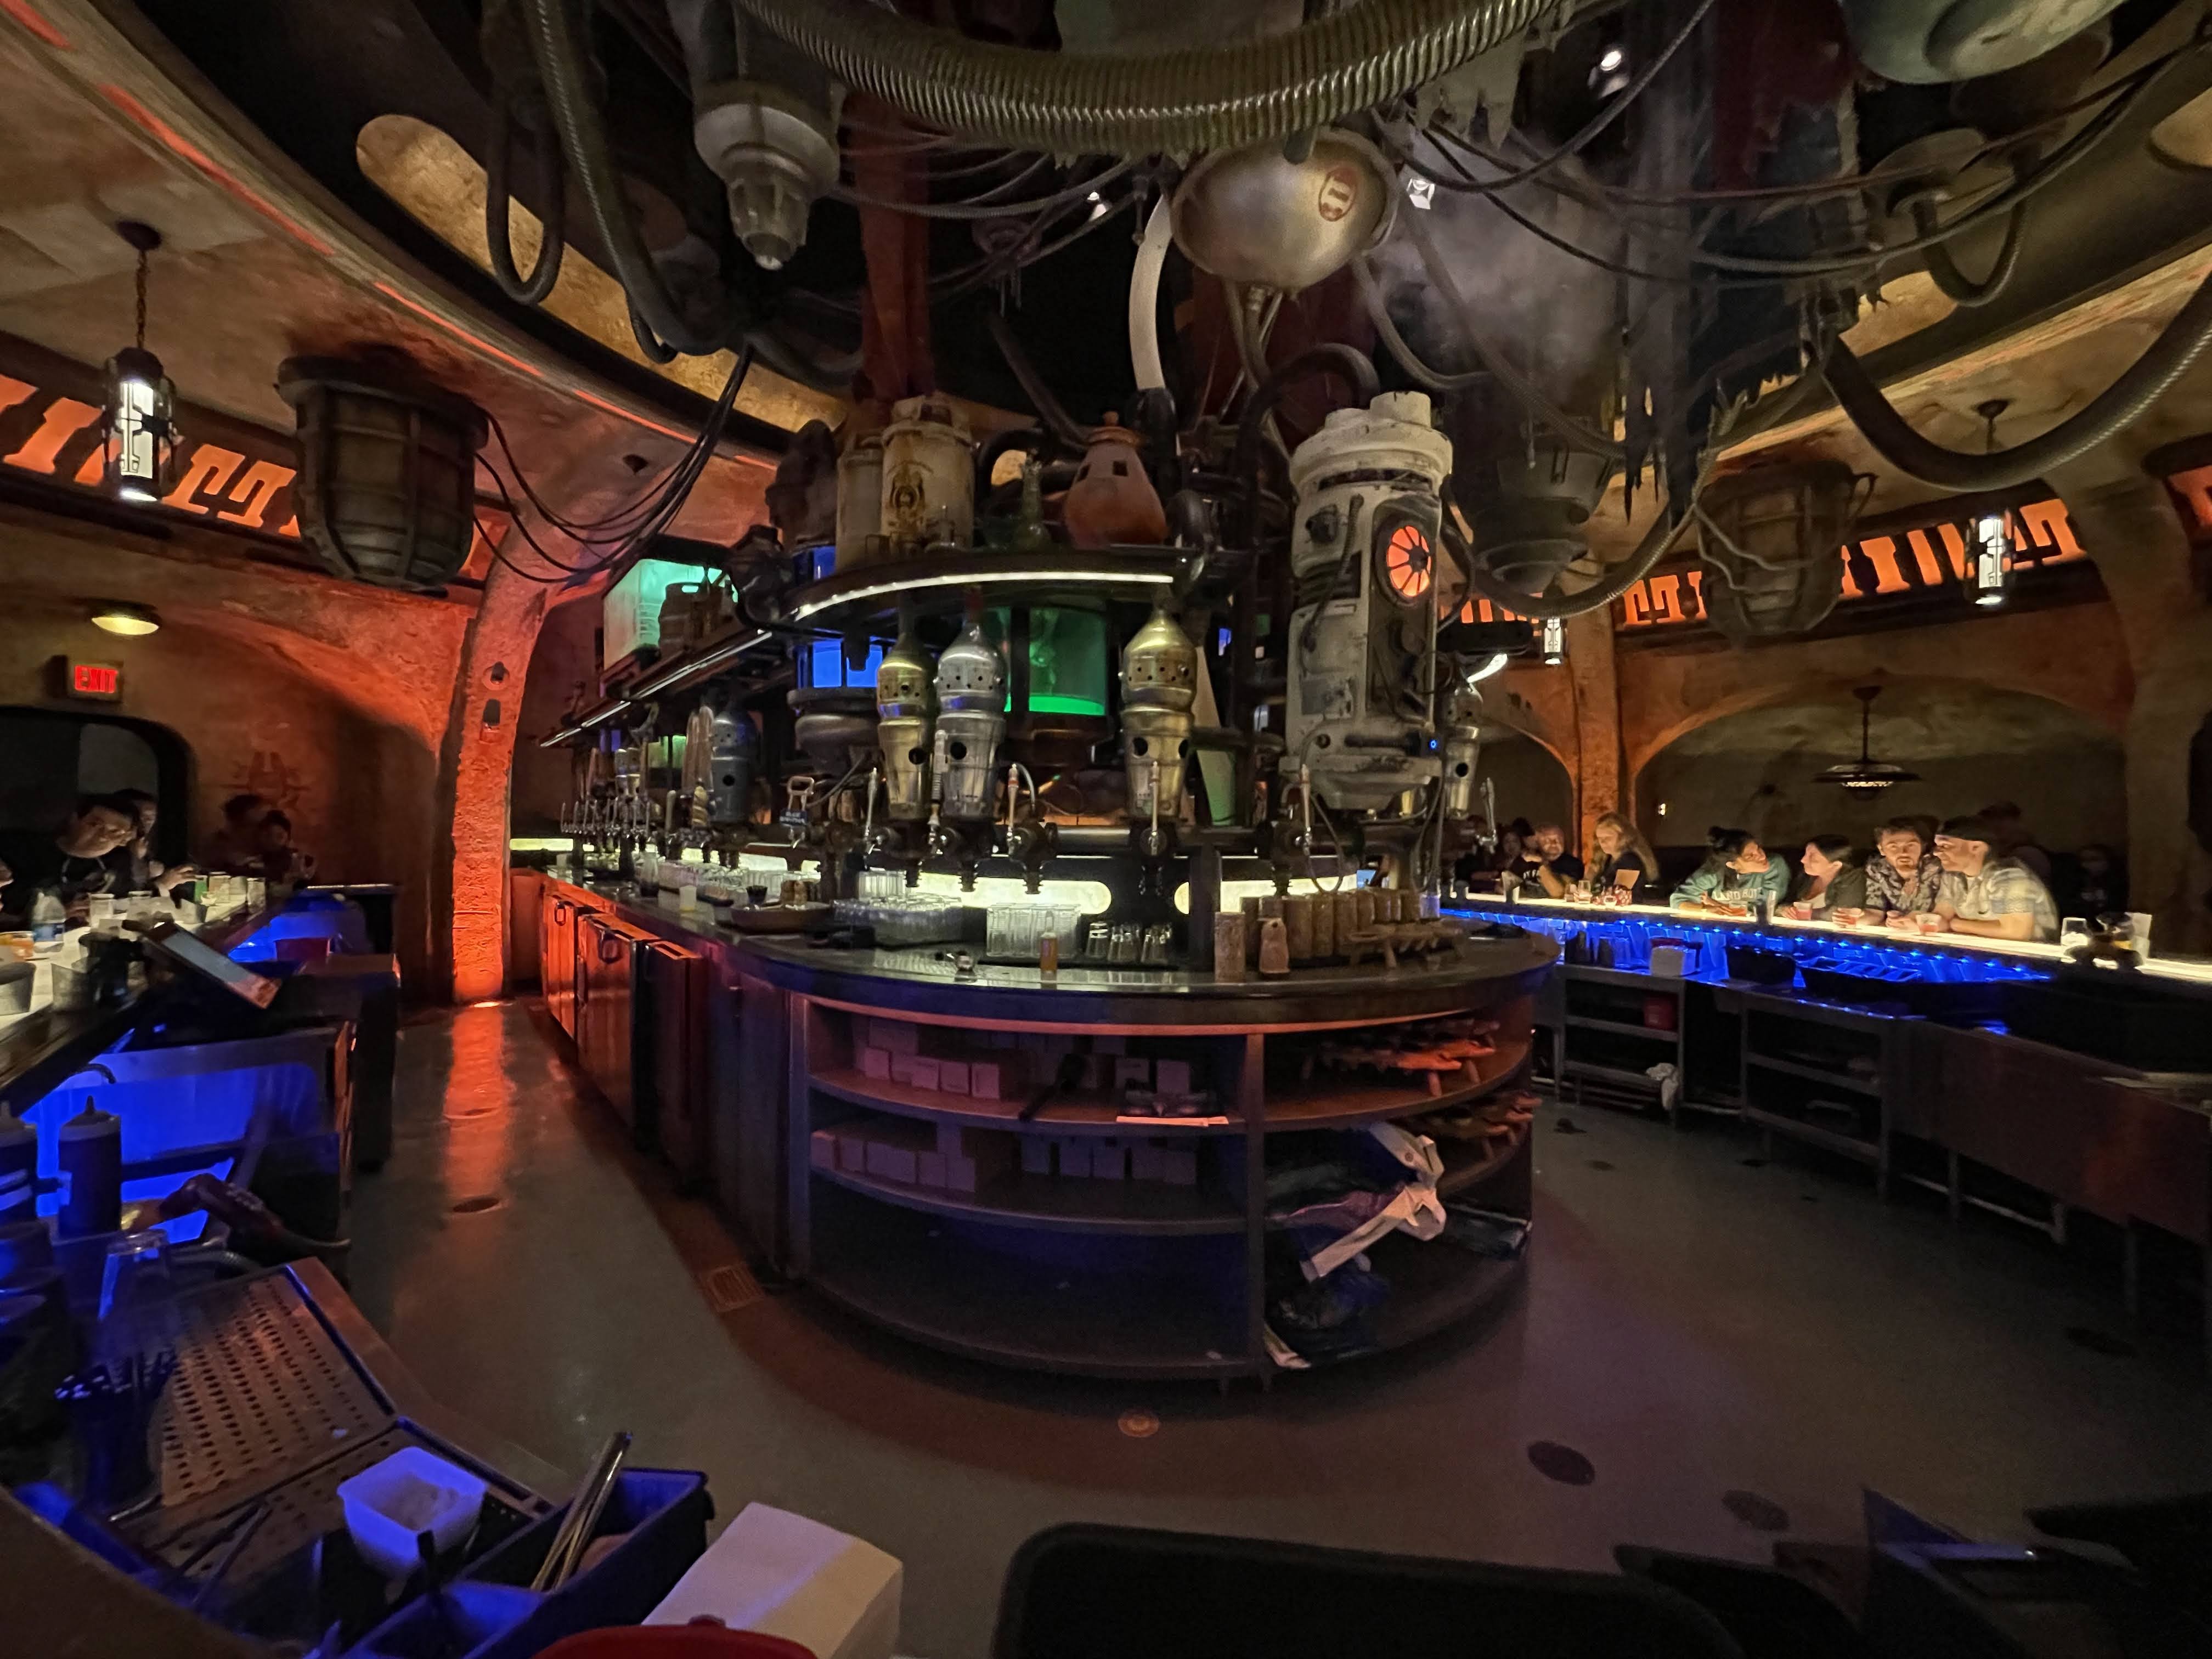 The interior of Oga's Cantina.